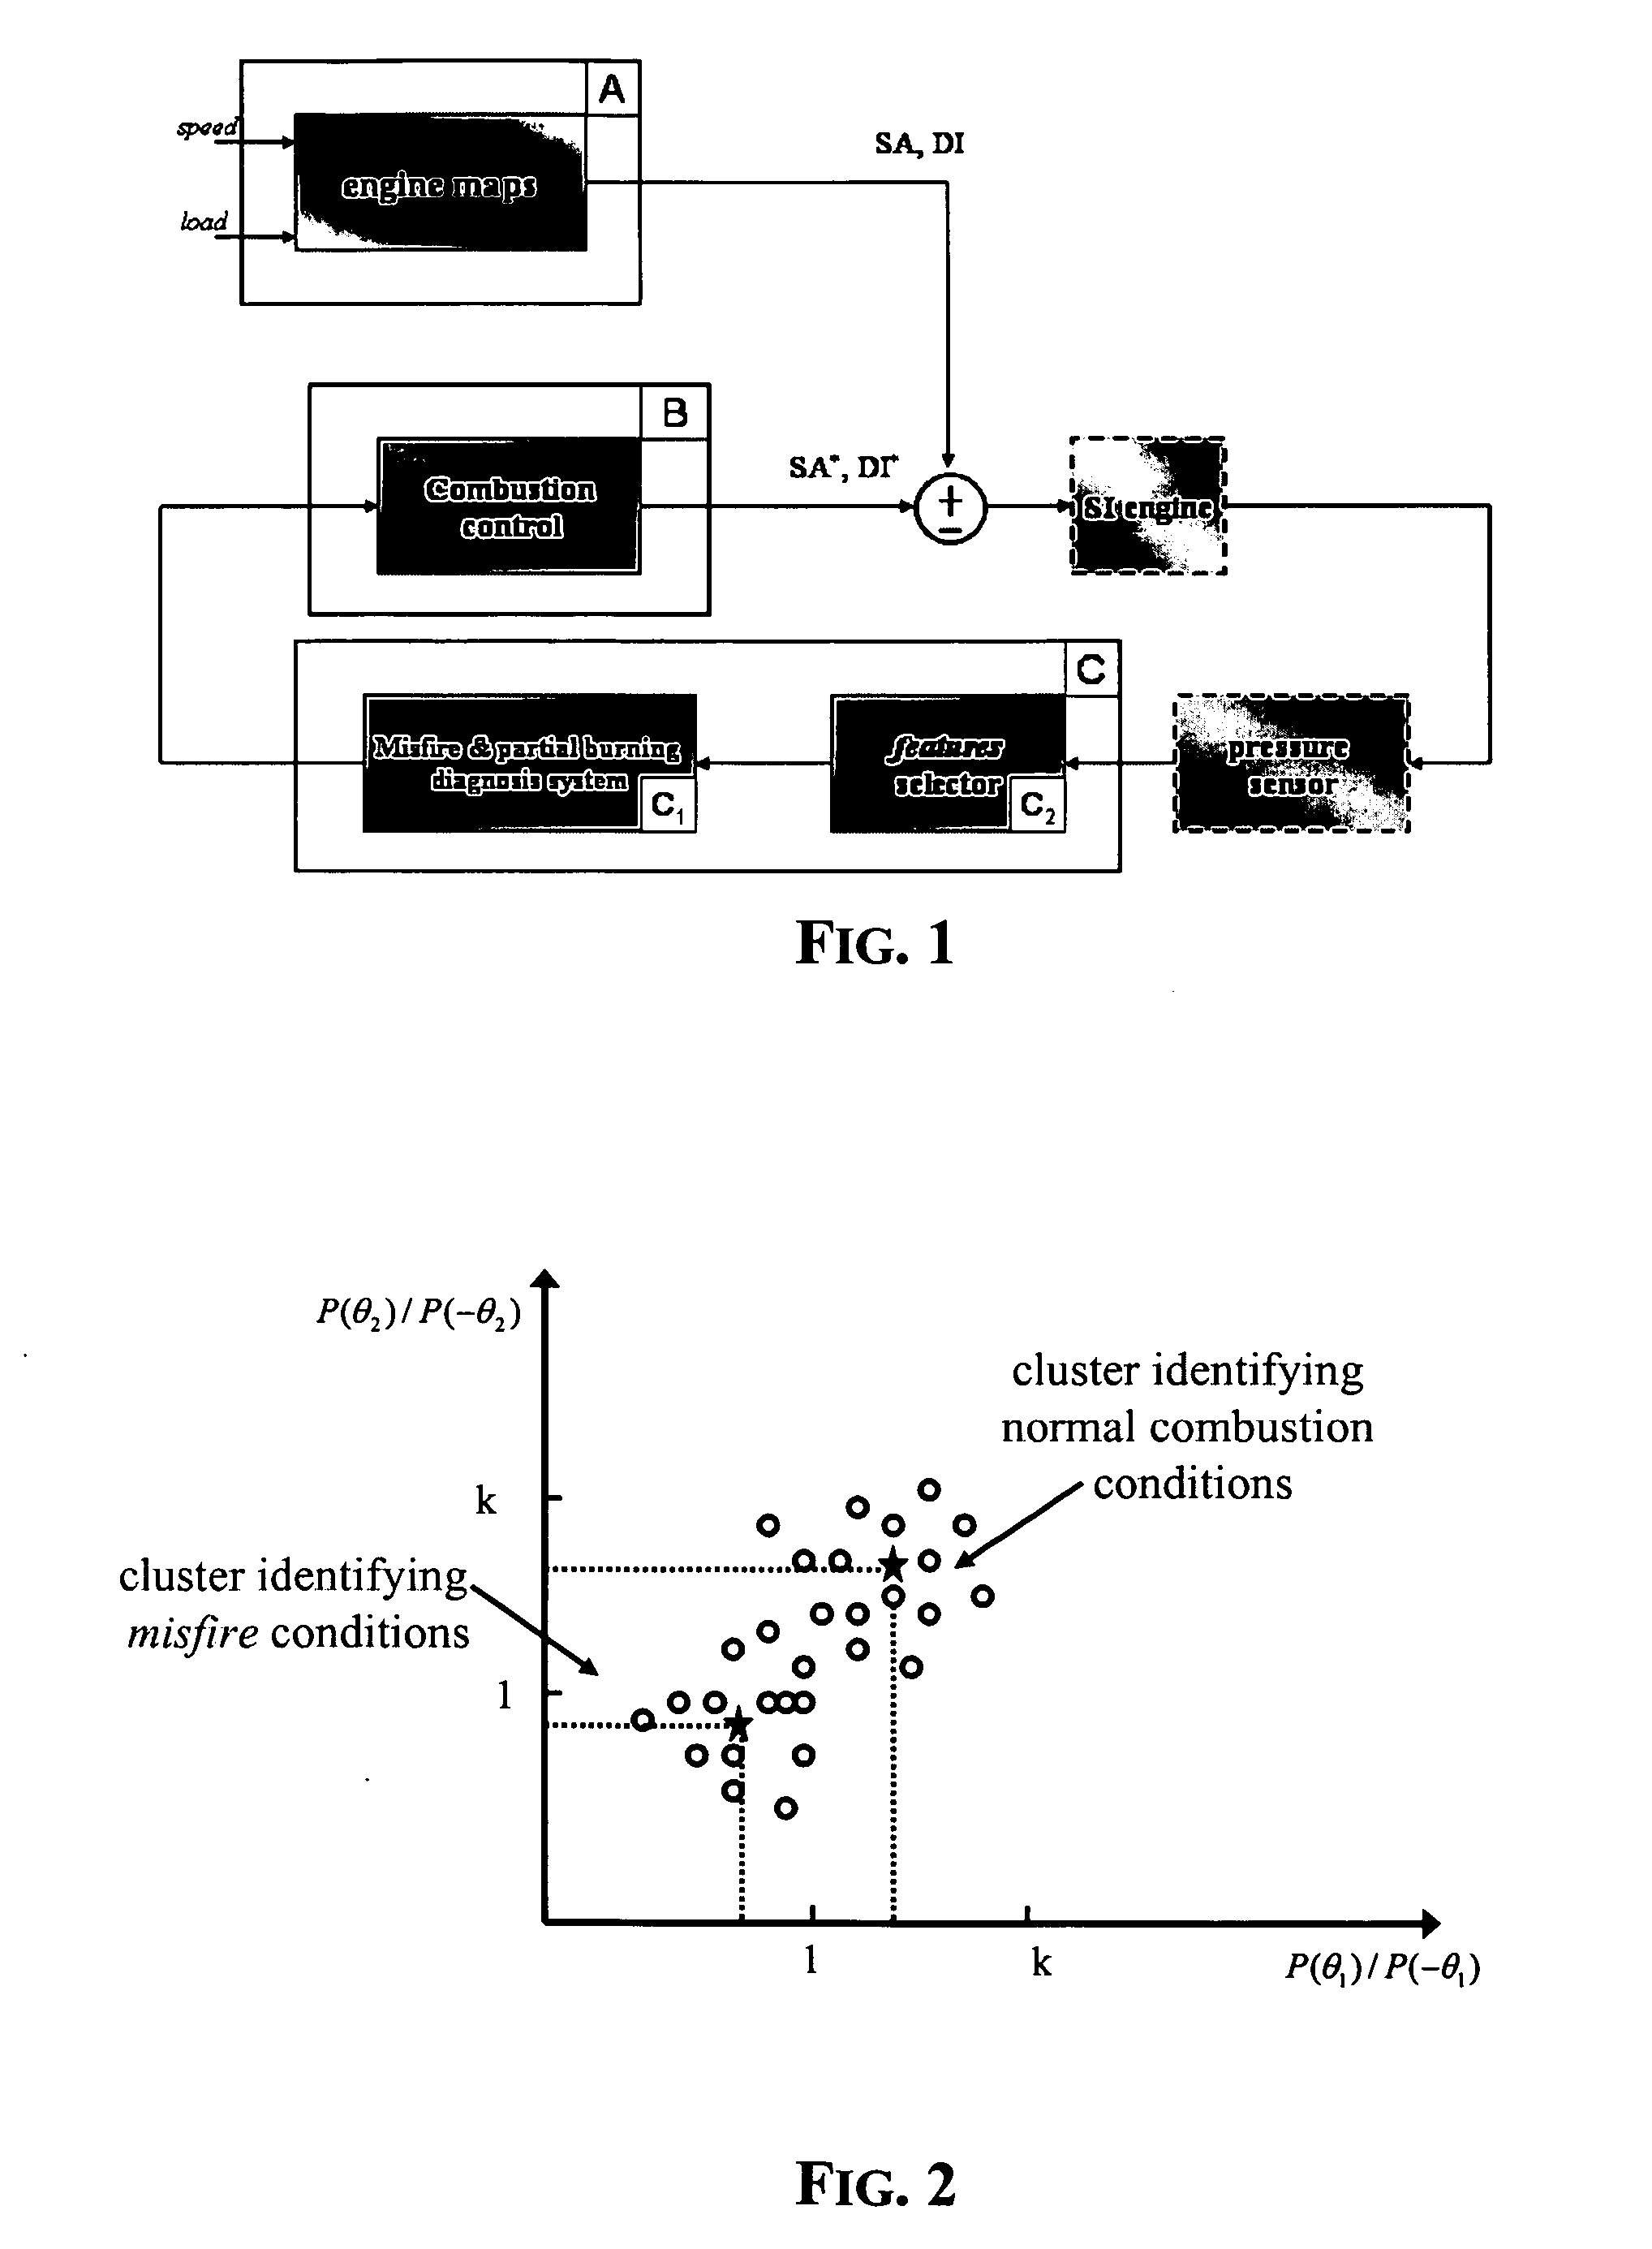 Method and a relative device for diagnosing misfire or partial combustion conditions in an internal combustion engine